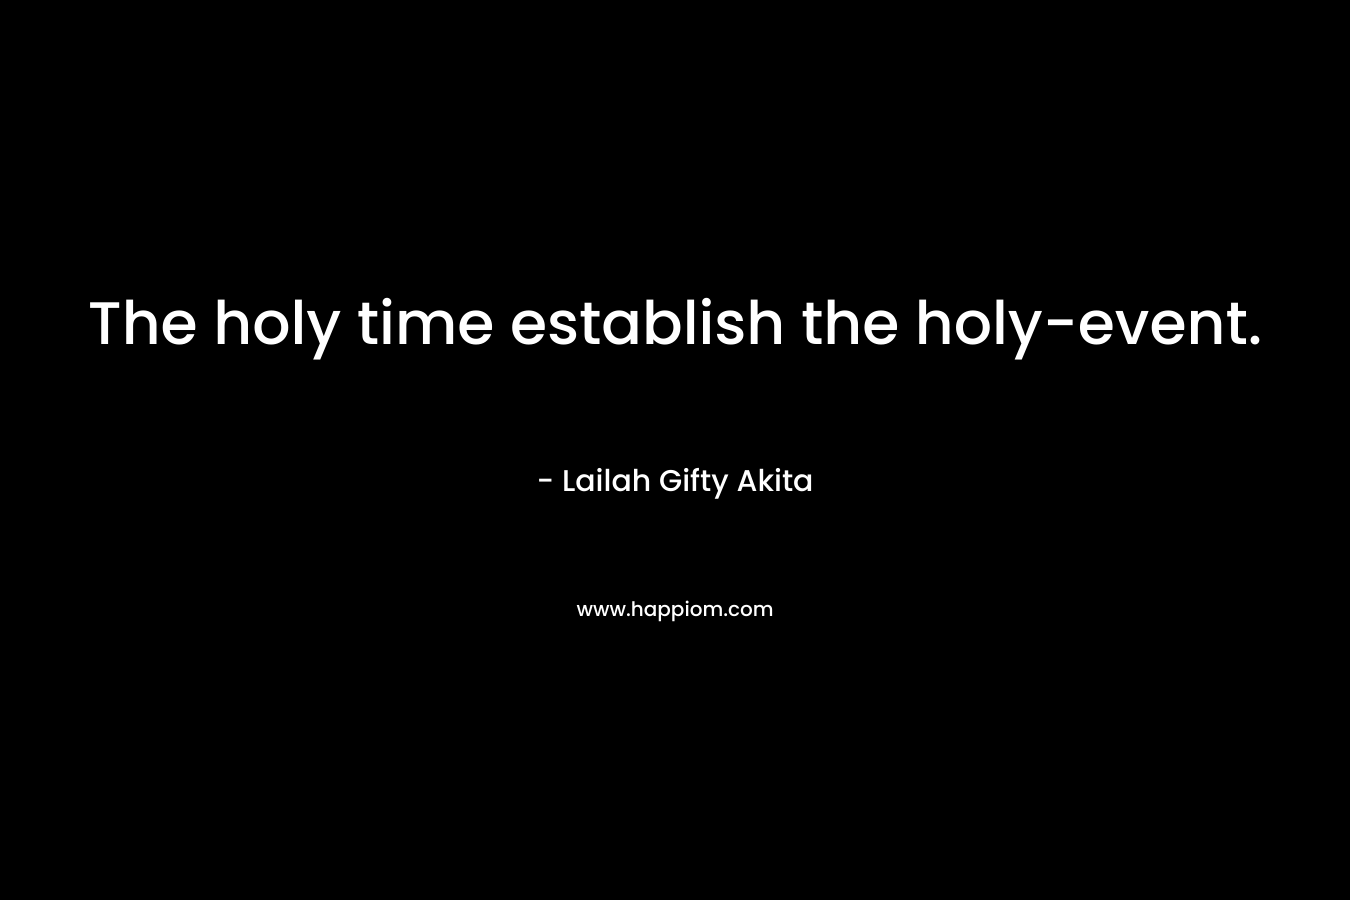 The holy time establish the holy-event. – Lailah Gifty Akita